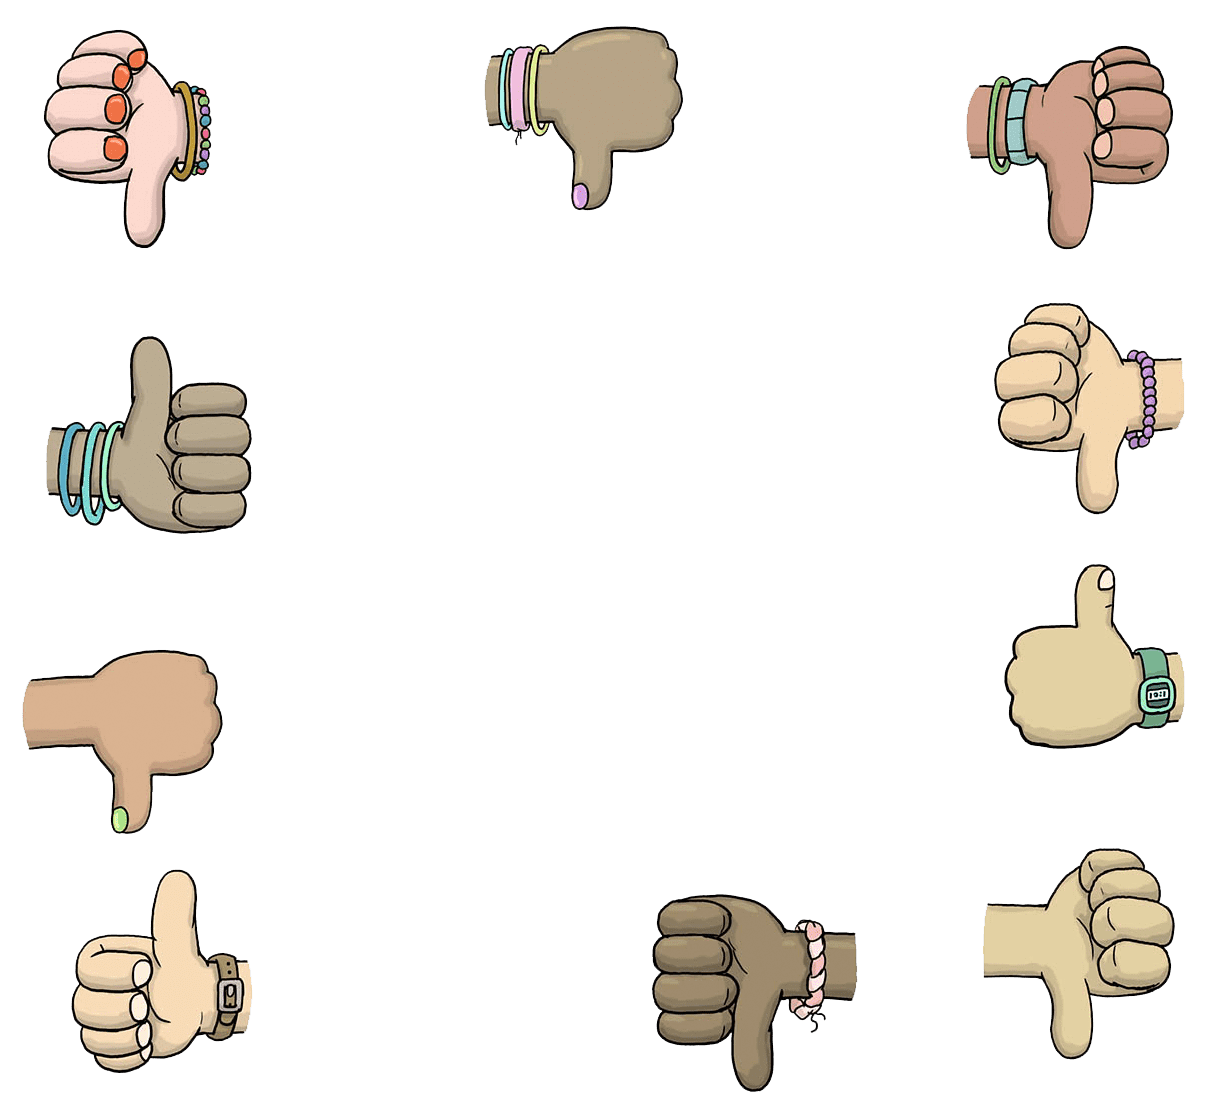 Illustration of hands showing thumbs up and thumbs down